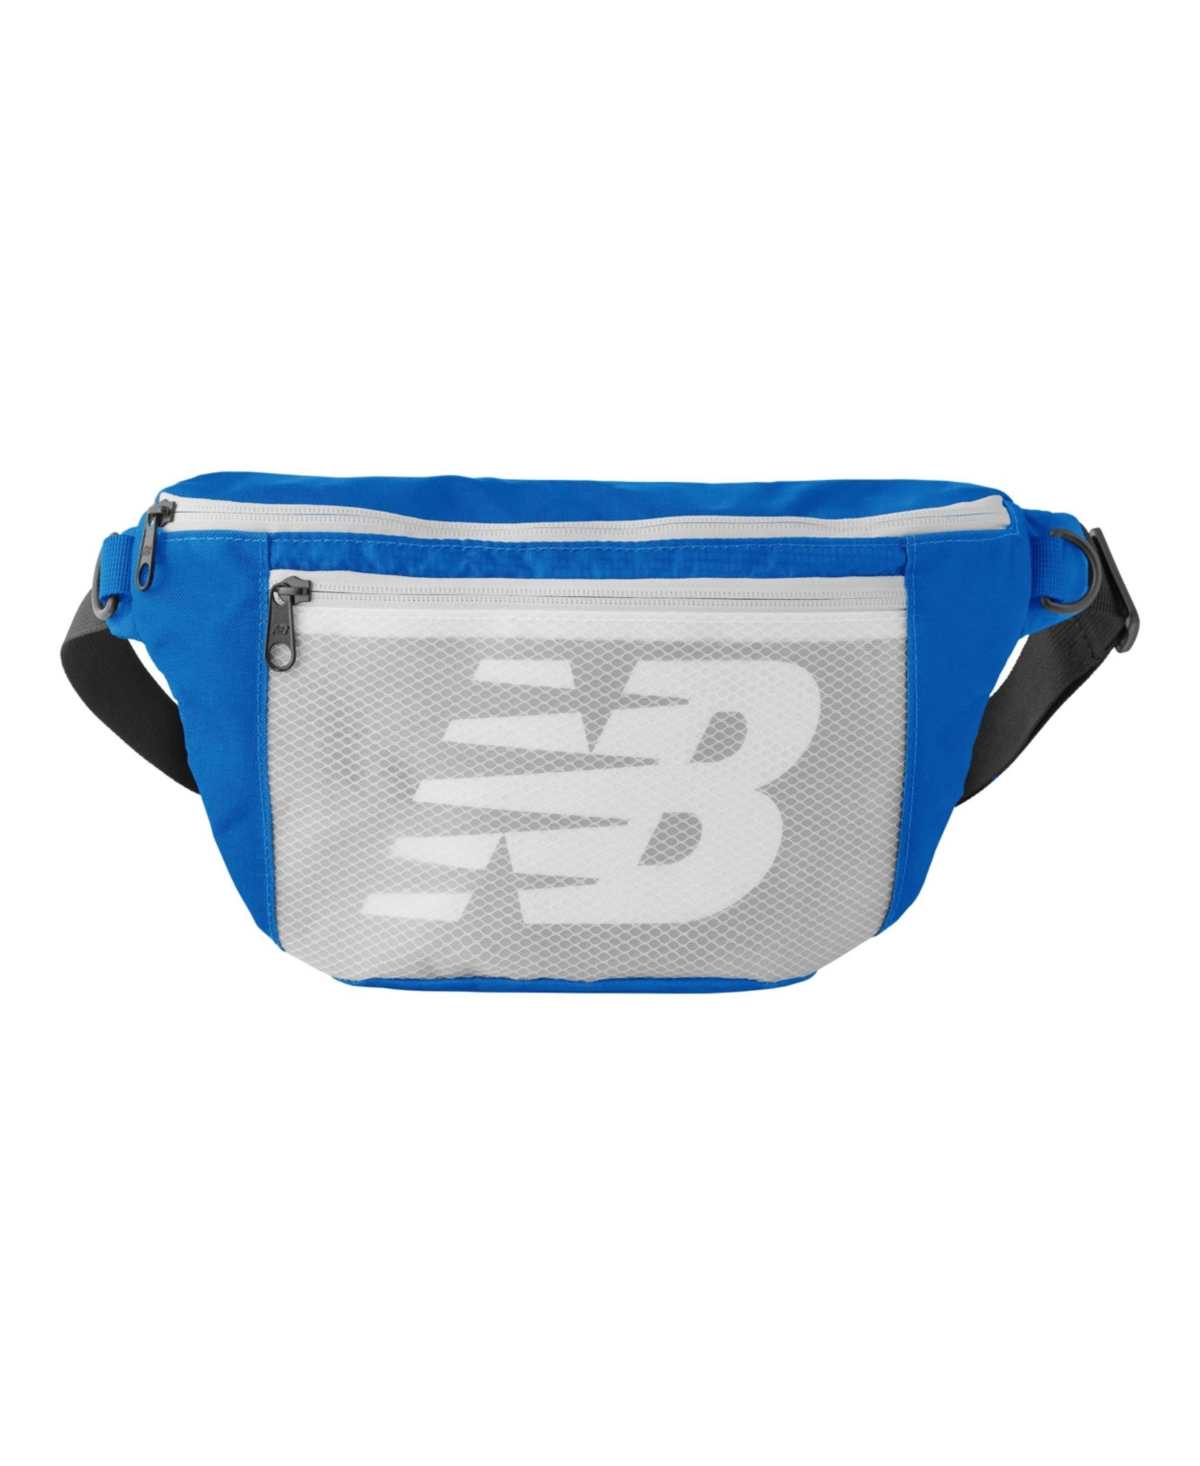 New Balance Core Performance Waist Bag, Large In Blue